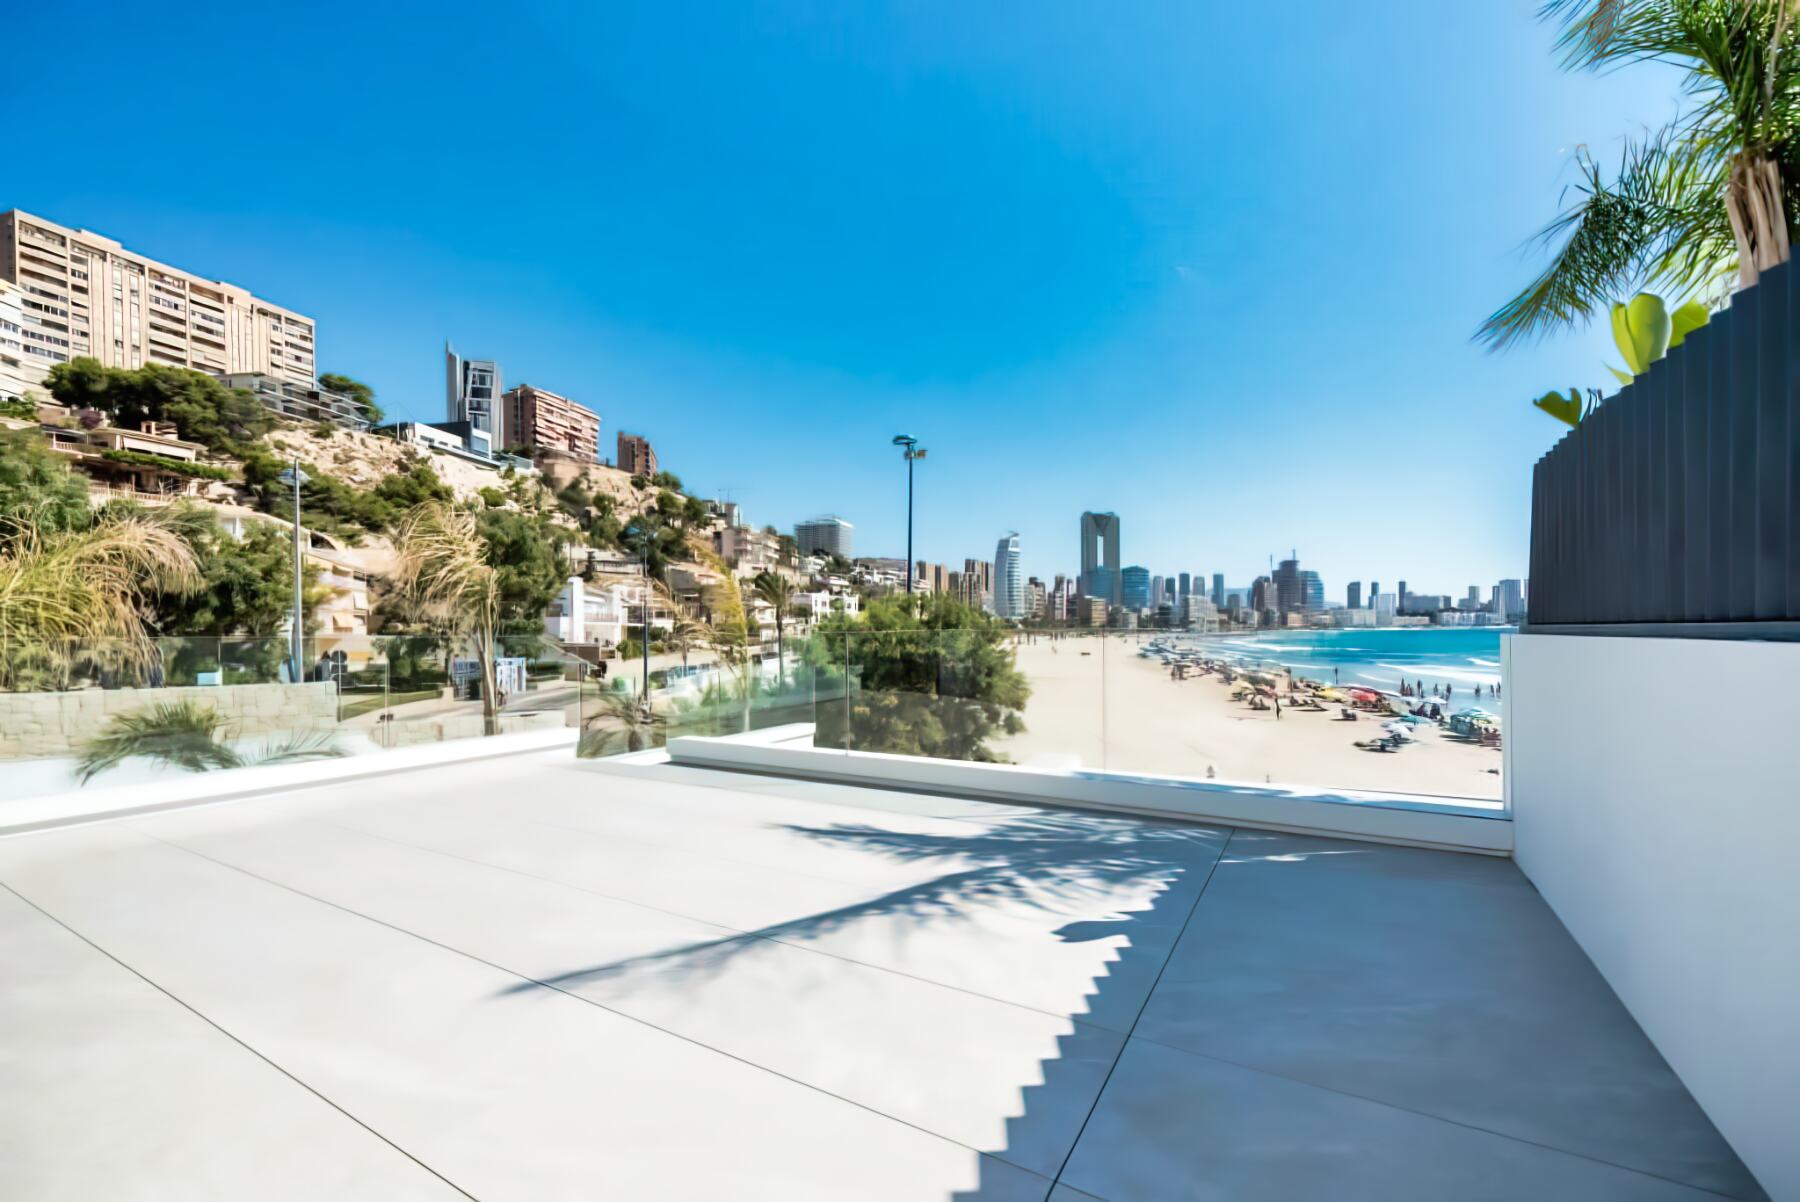 Luxury apartments and duplex in Benidorm at the seafront